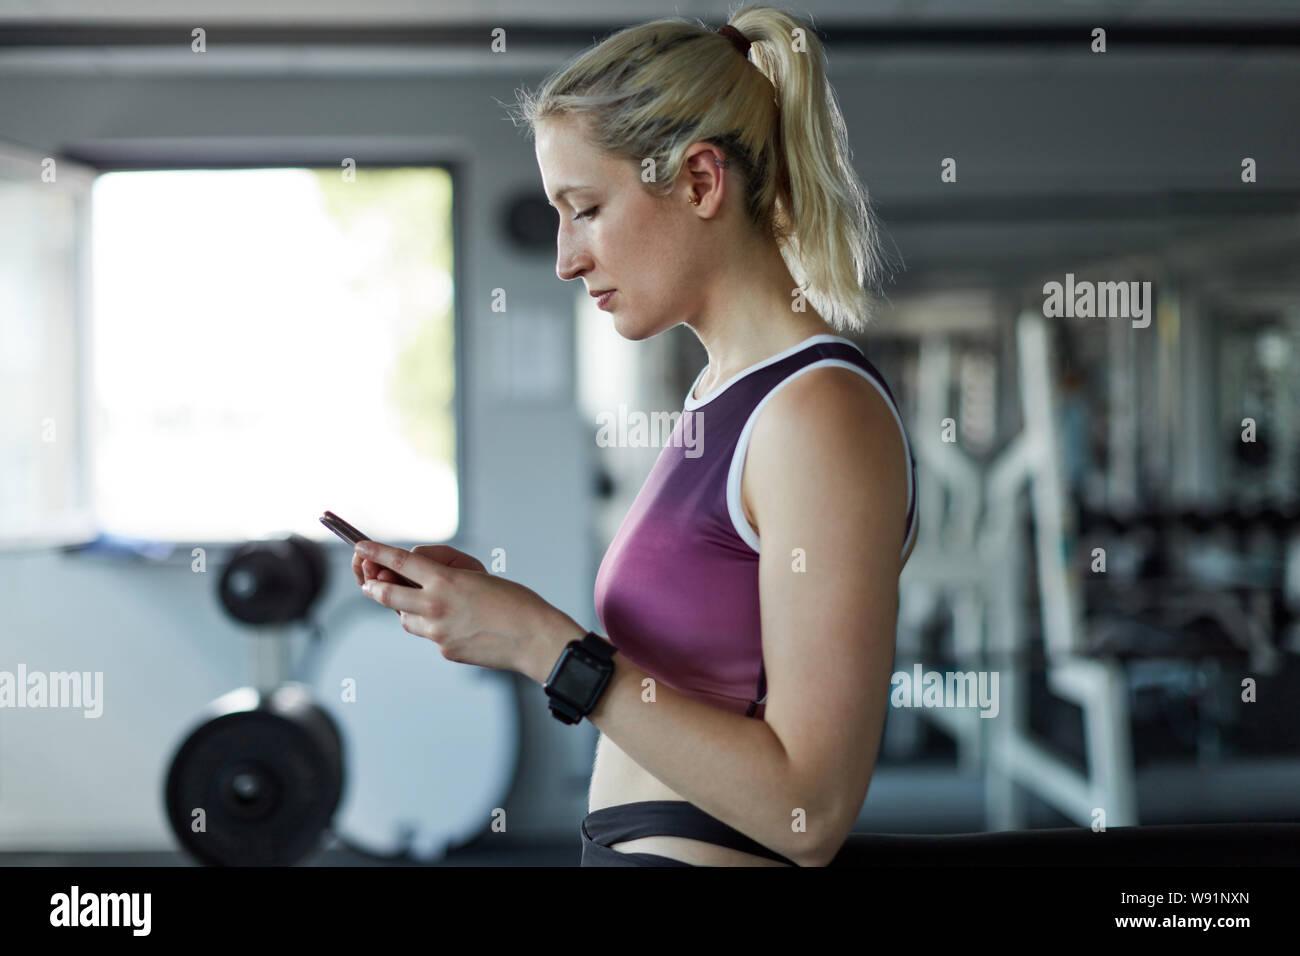 Sporty young woman is looking on her smartphone and reading a text message while training Stock Photo